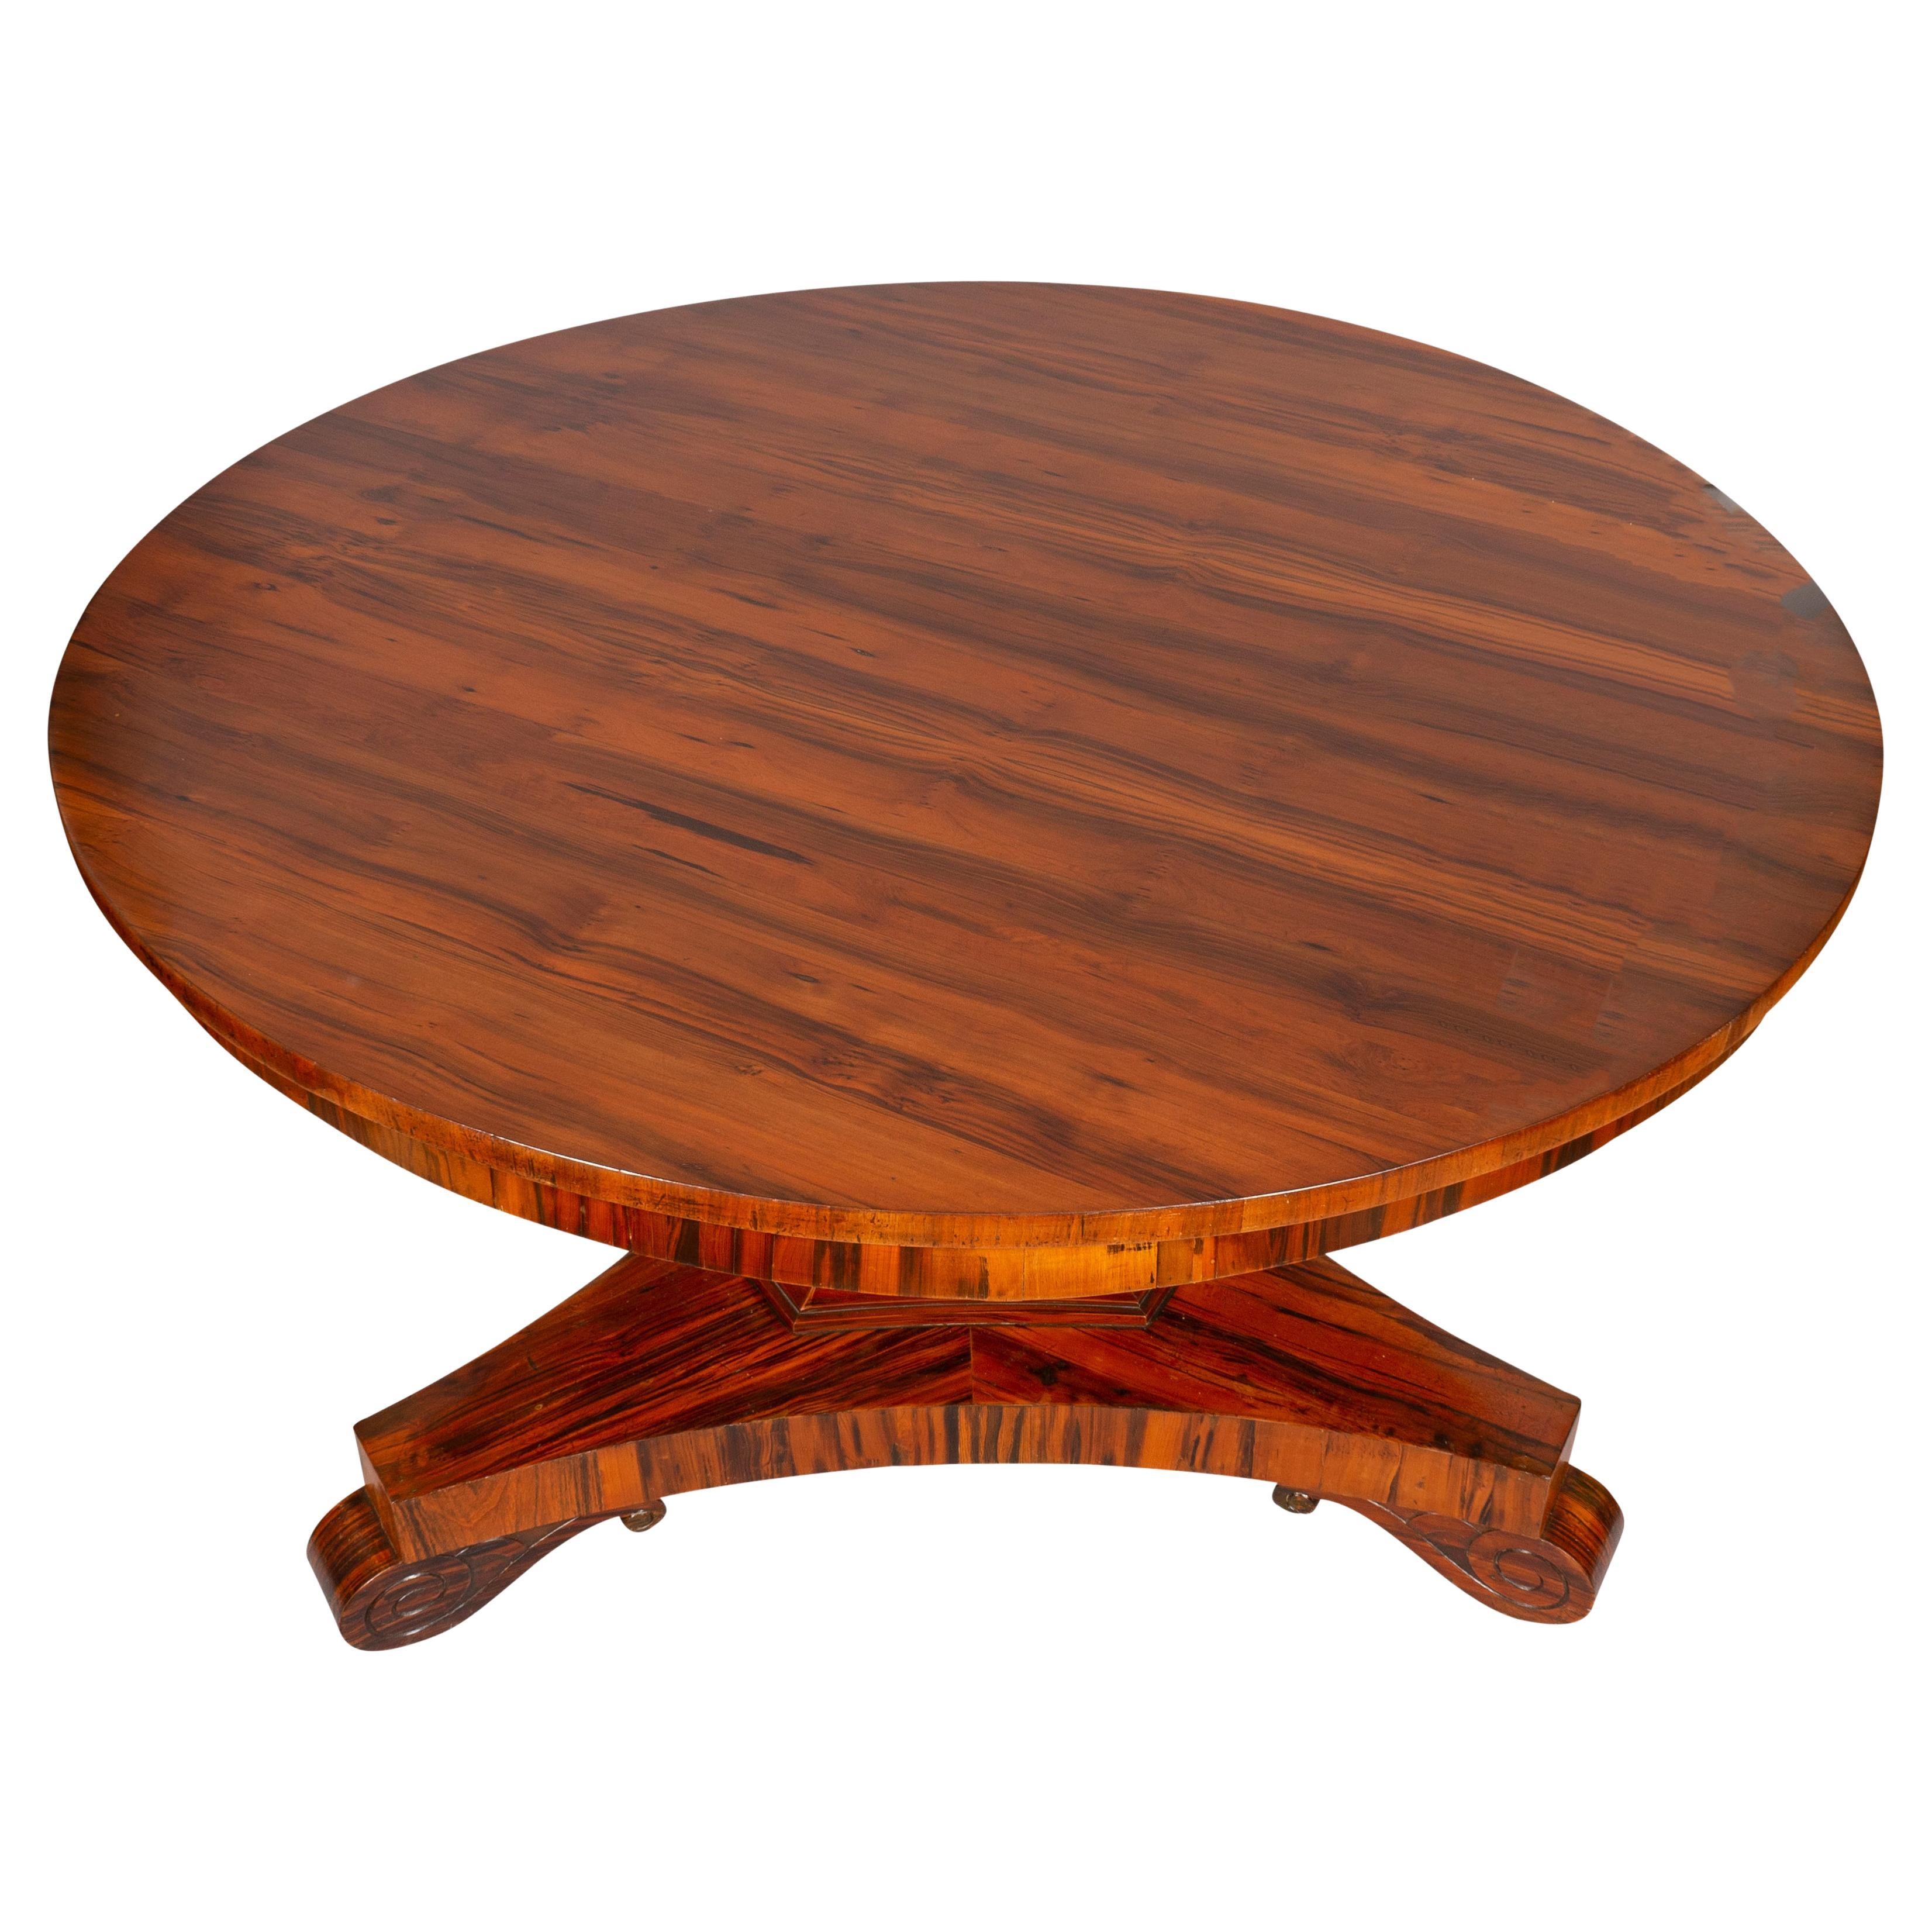 Circular hinged top with vibrant pattern and matching shallow apron raised on a triangular support and ending on a tripartite base with Vitruvian scroll feet. Goncalo Alves is a wood from Brazil favored for it contrasting streaks of color.